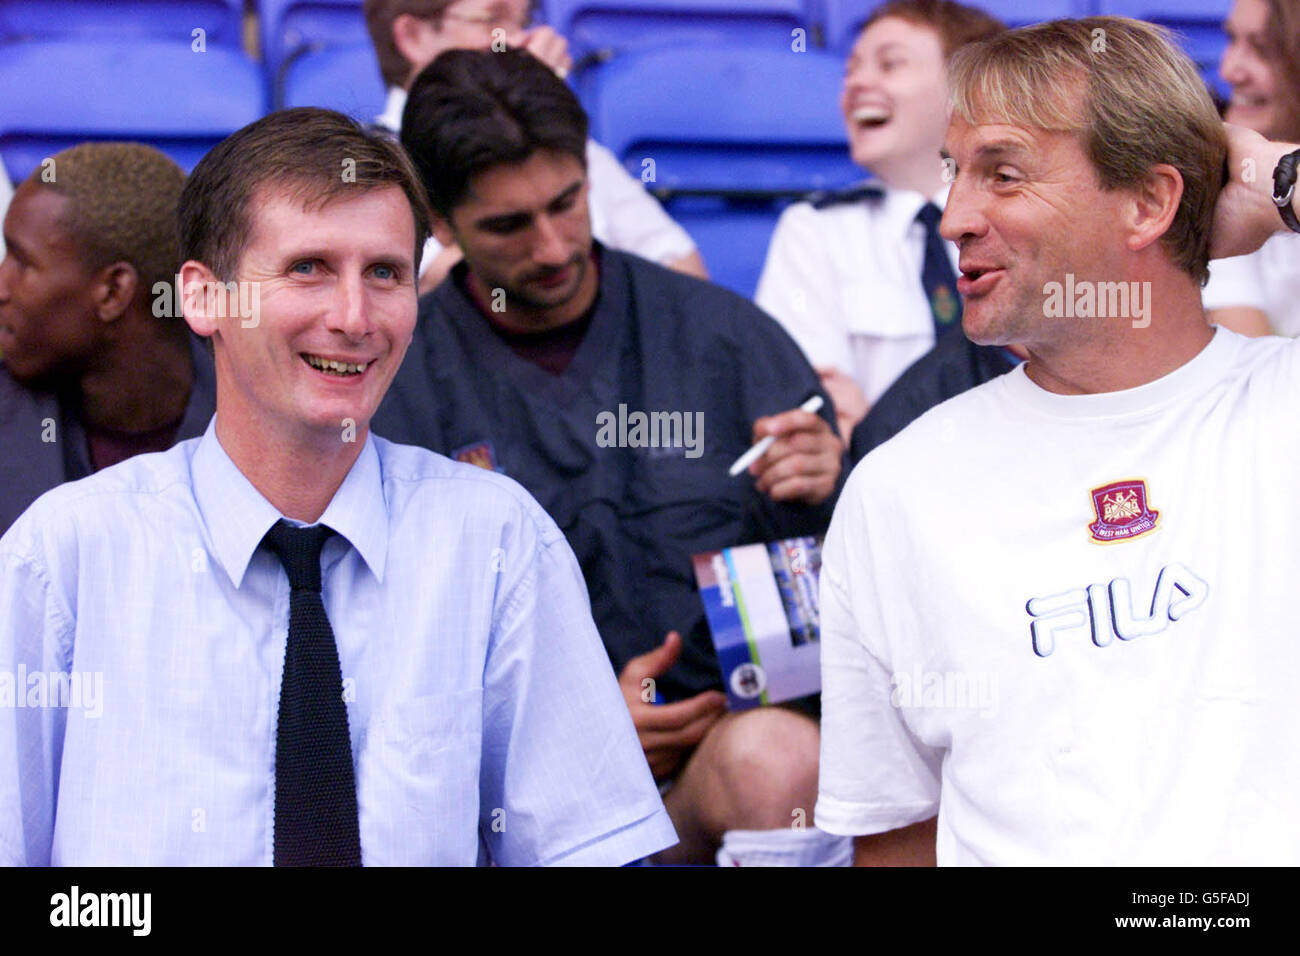 West Ham United's new manager Glenn Roeder (left) talks with Paul Goddard his first team coach, during the pre-season friendly game against Peterborough United at London Road, Peterborough. Stock Photo